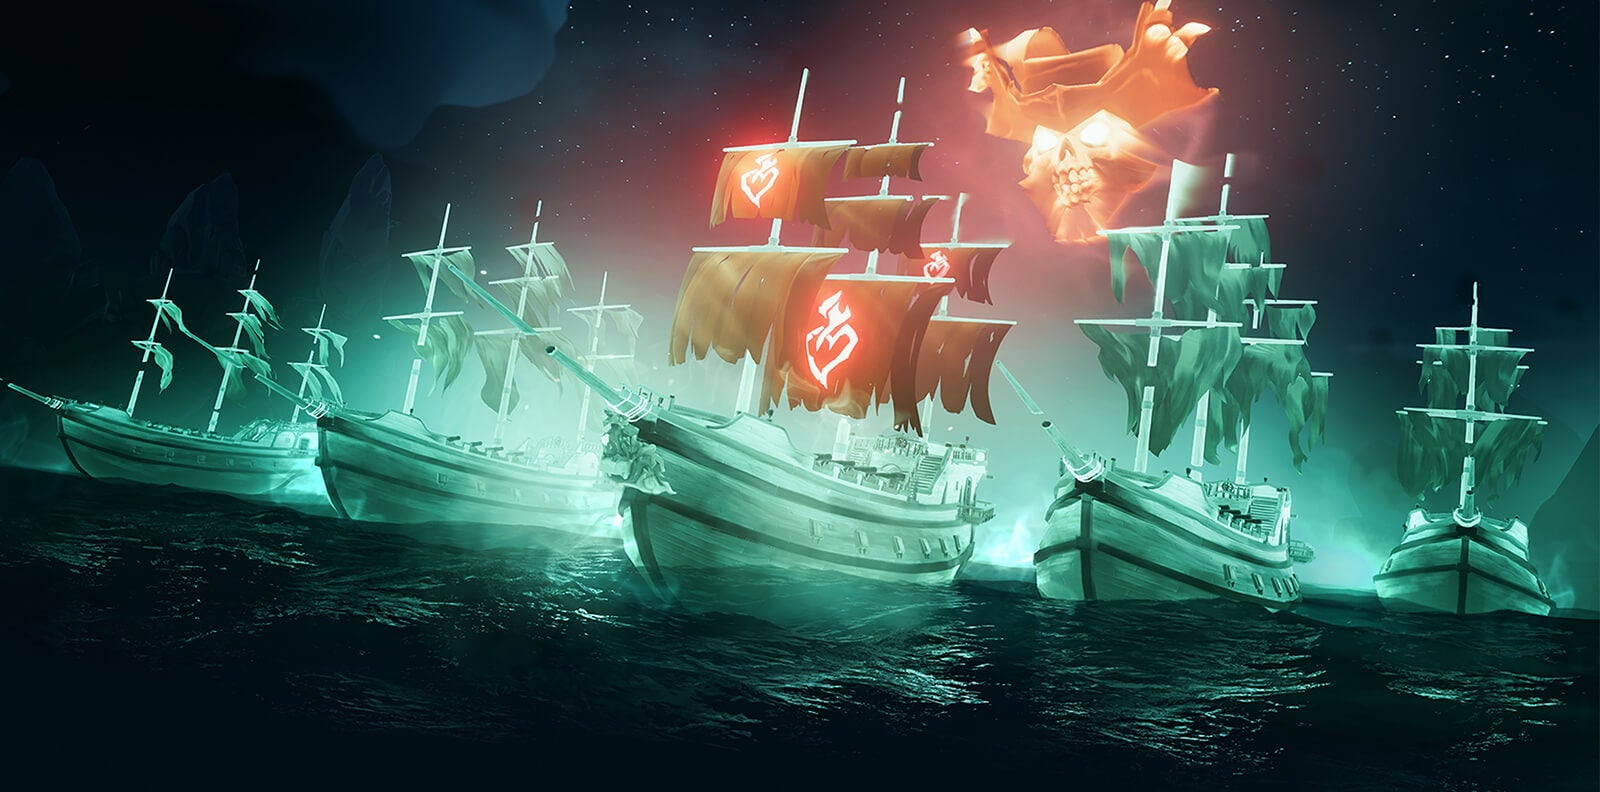 Image for Sea of Thieves update Haunted Shores adds ghost ships, new shanties, and more